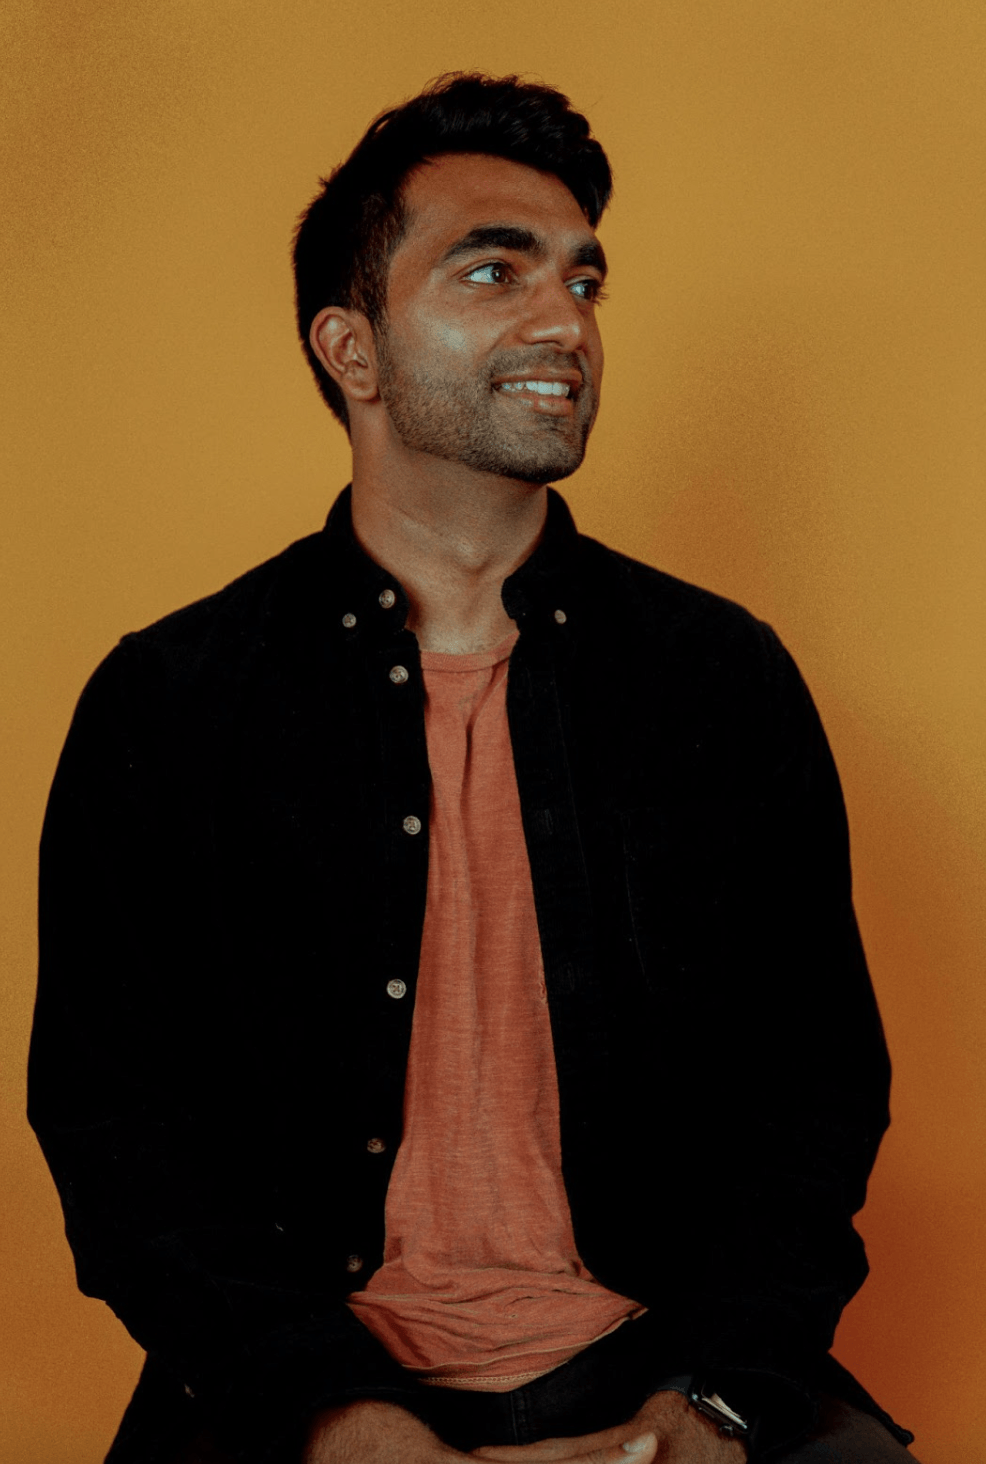 A photo of Ameet Kallaracki, a dark-skinned man. He is wearing a black button down shirt, open to reveal an orange shirt underneath. He gazing off to the right and smiling slightly.